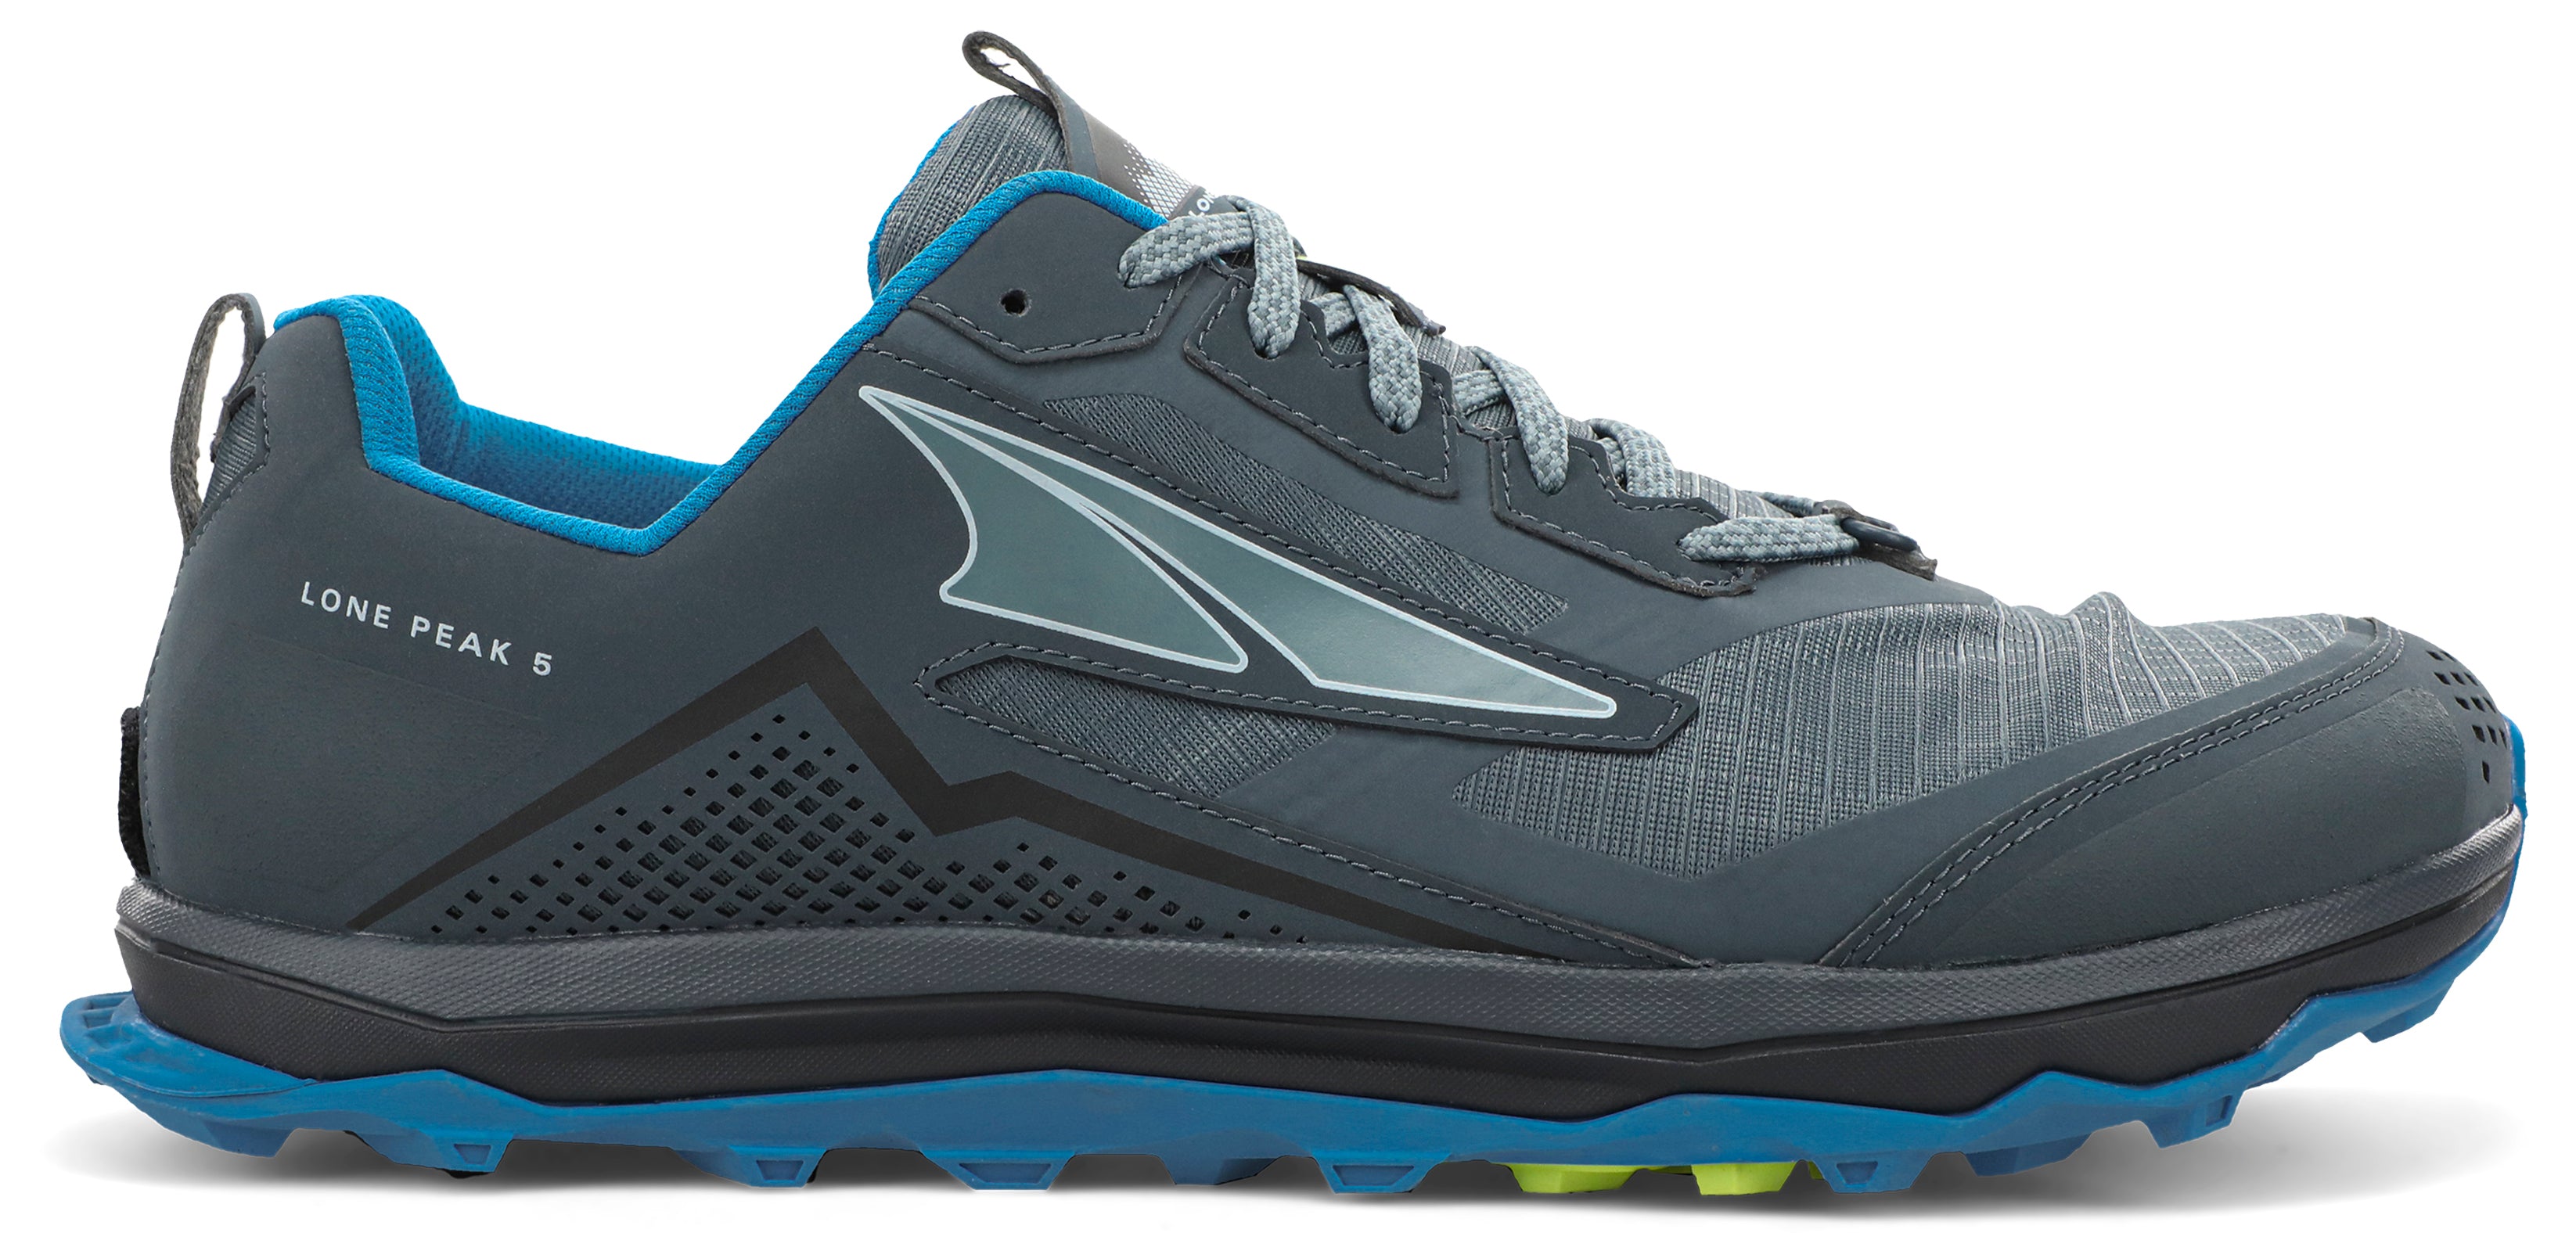 Altra Men's Lone Peak 5 Trail Running Shoe in Blue/Lime from the side